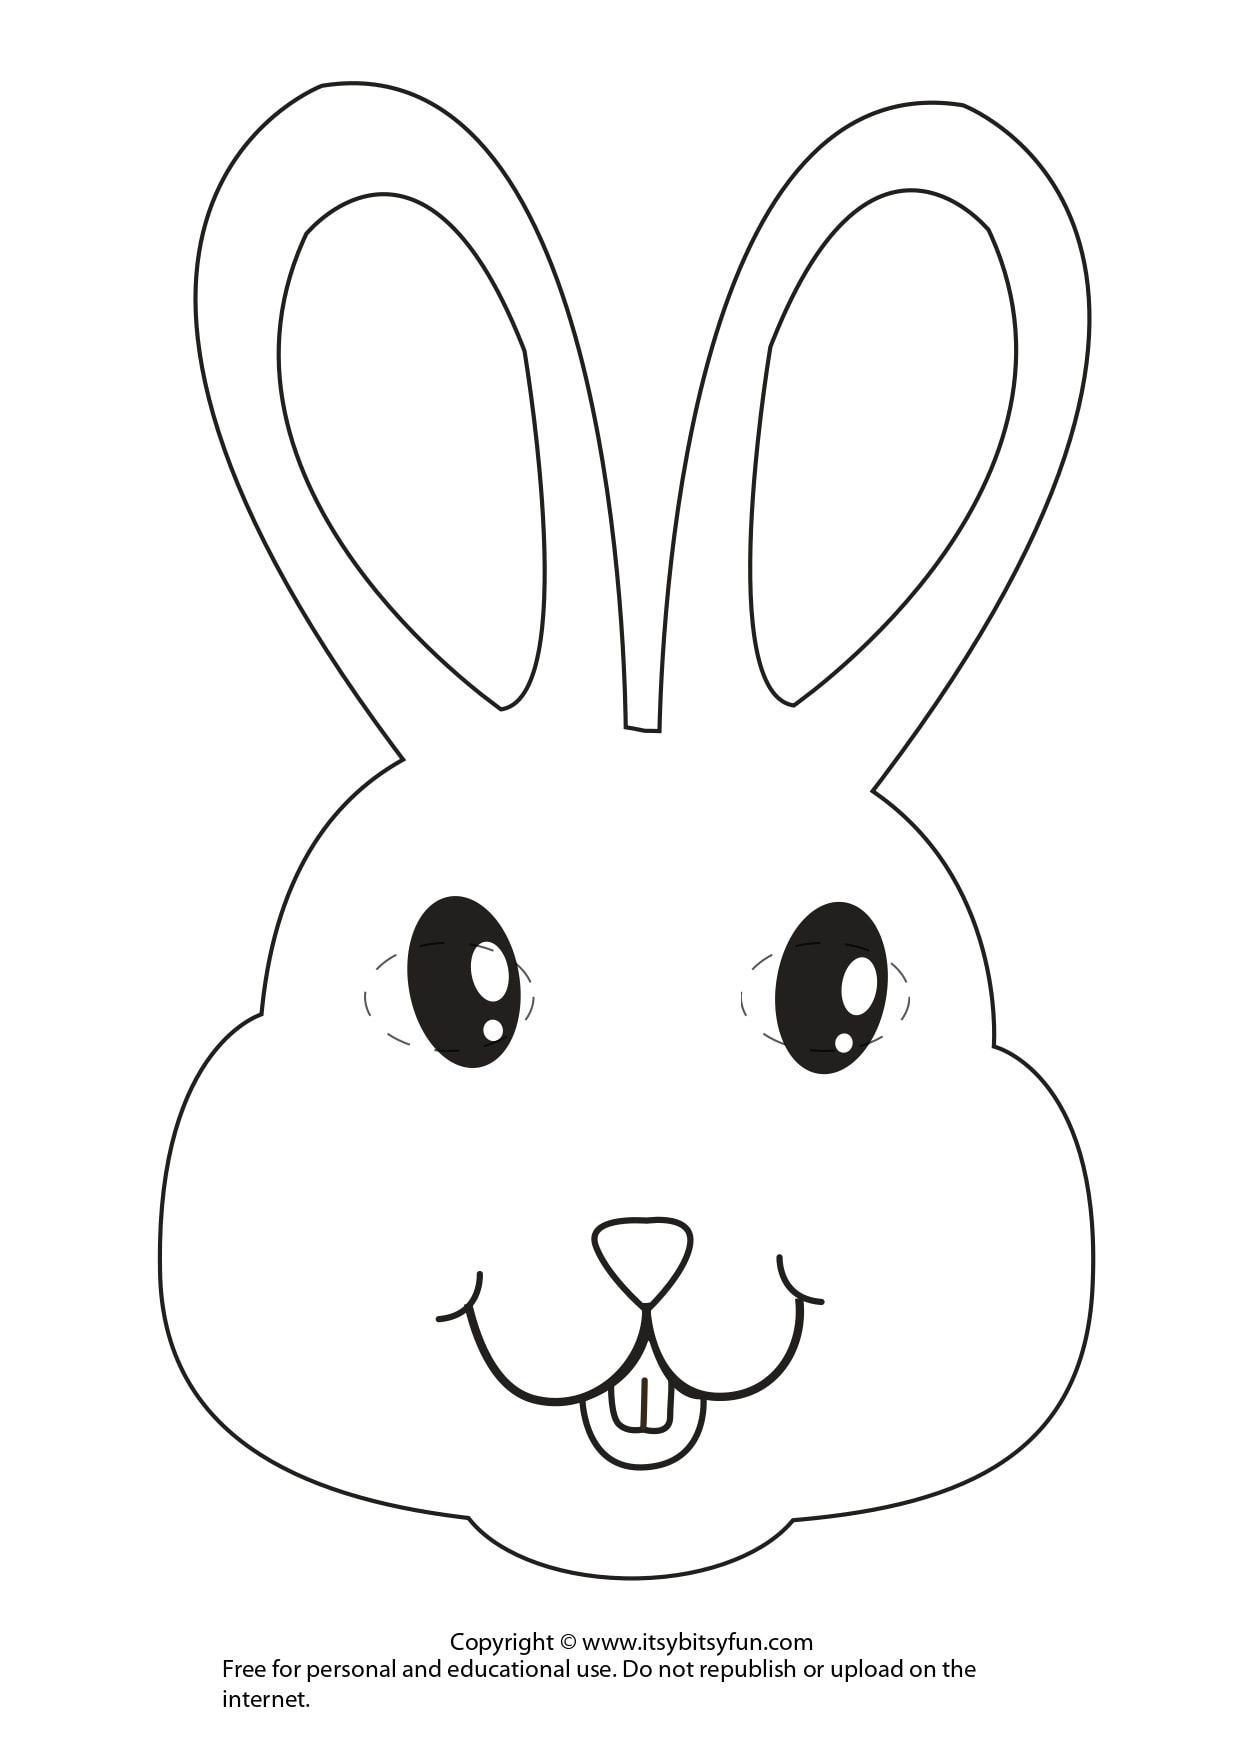 Easter Masks - Bunny Rabbit And Chick Template - Itsy Bitsy Fun - Free Printable Bunny Pictures